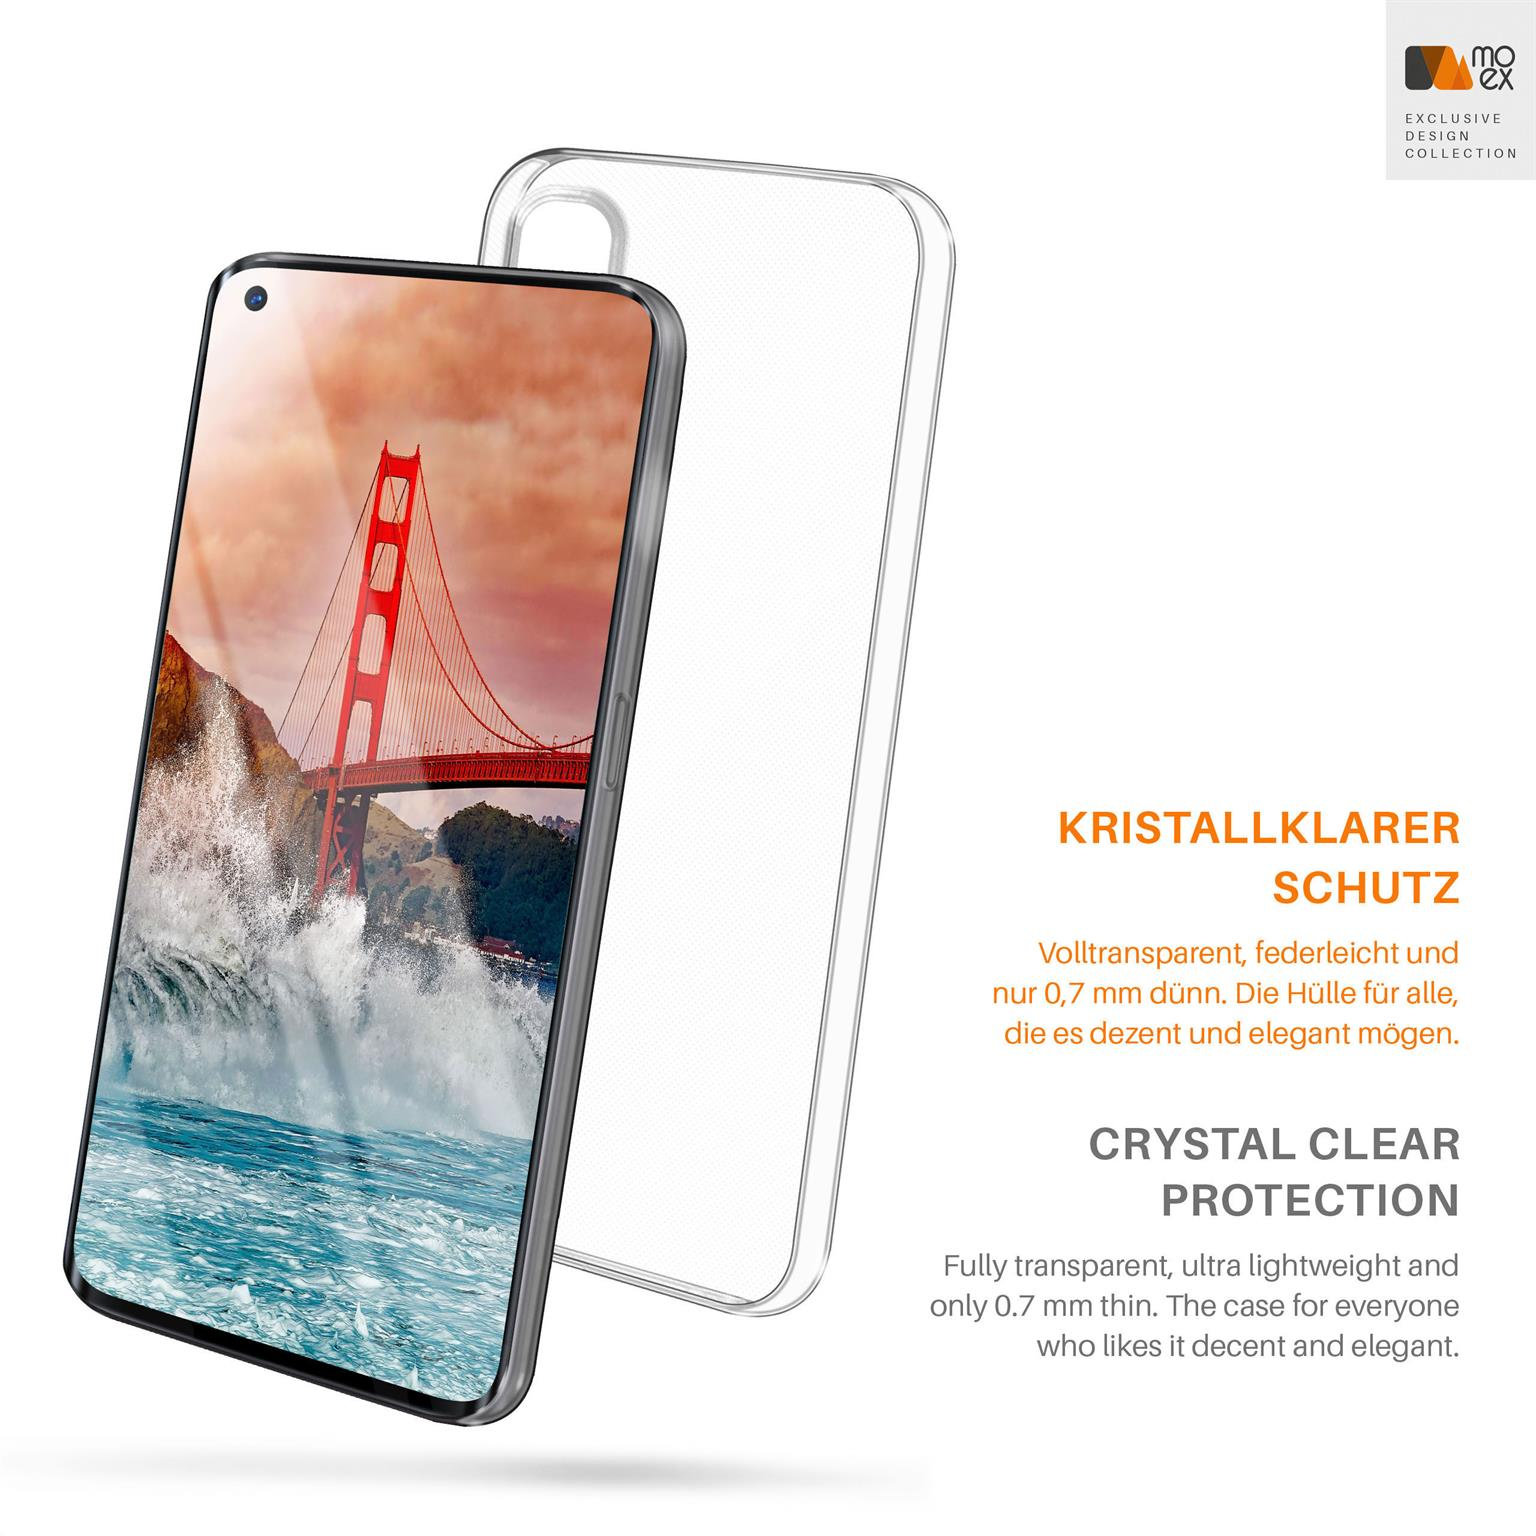 MOEX Aero Oppo, X2 Crystal-Clear Find Case, Neo, Backcover